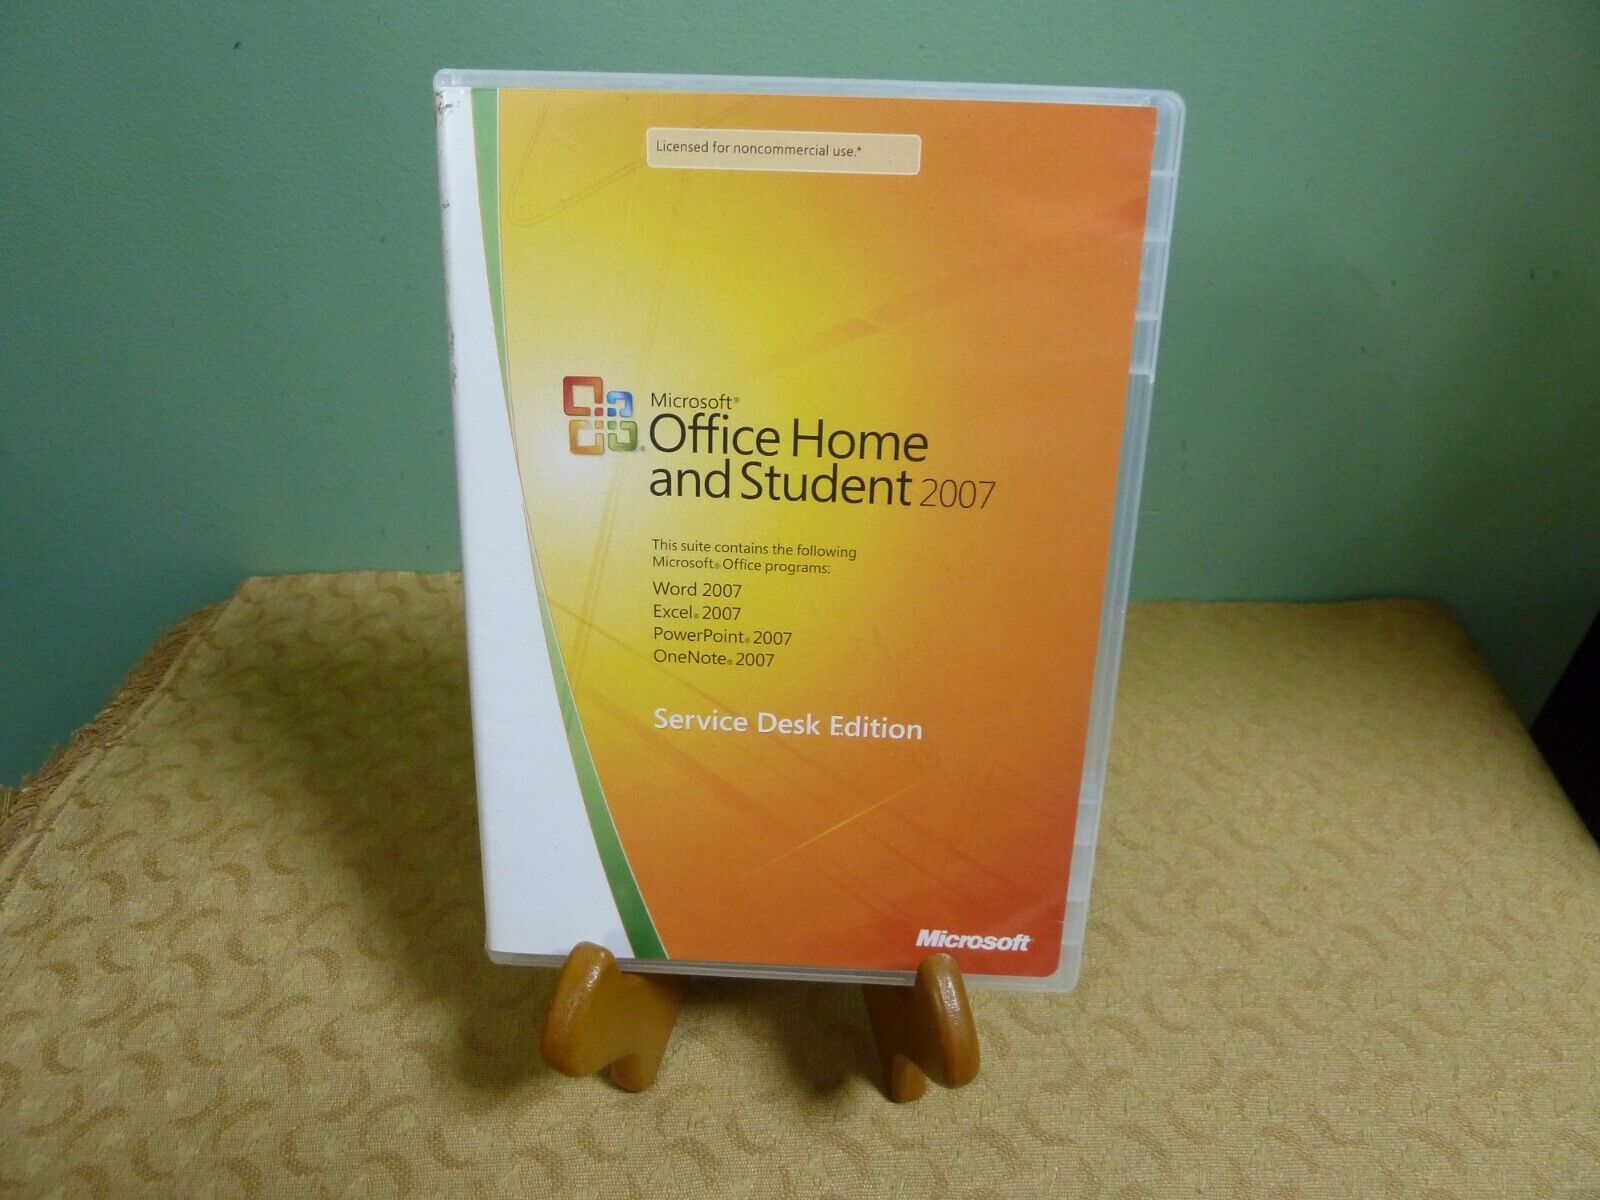 Microsoft Office Home and Student 2007 Service Desk Edition w/ Product Key - $29.65